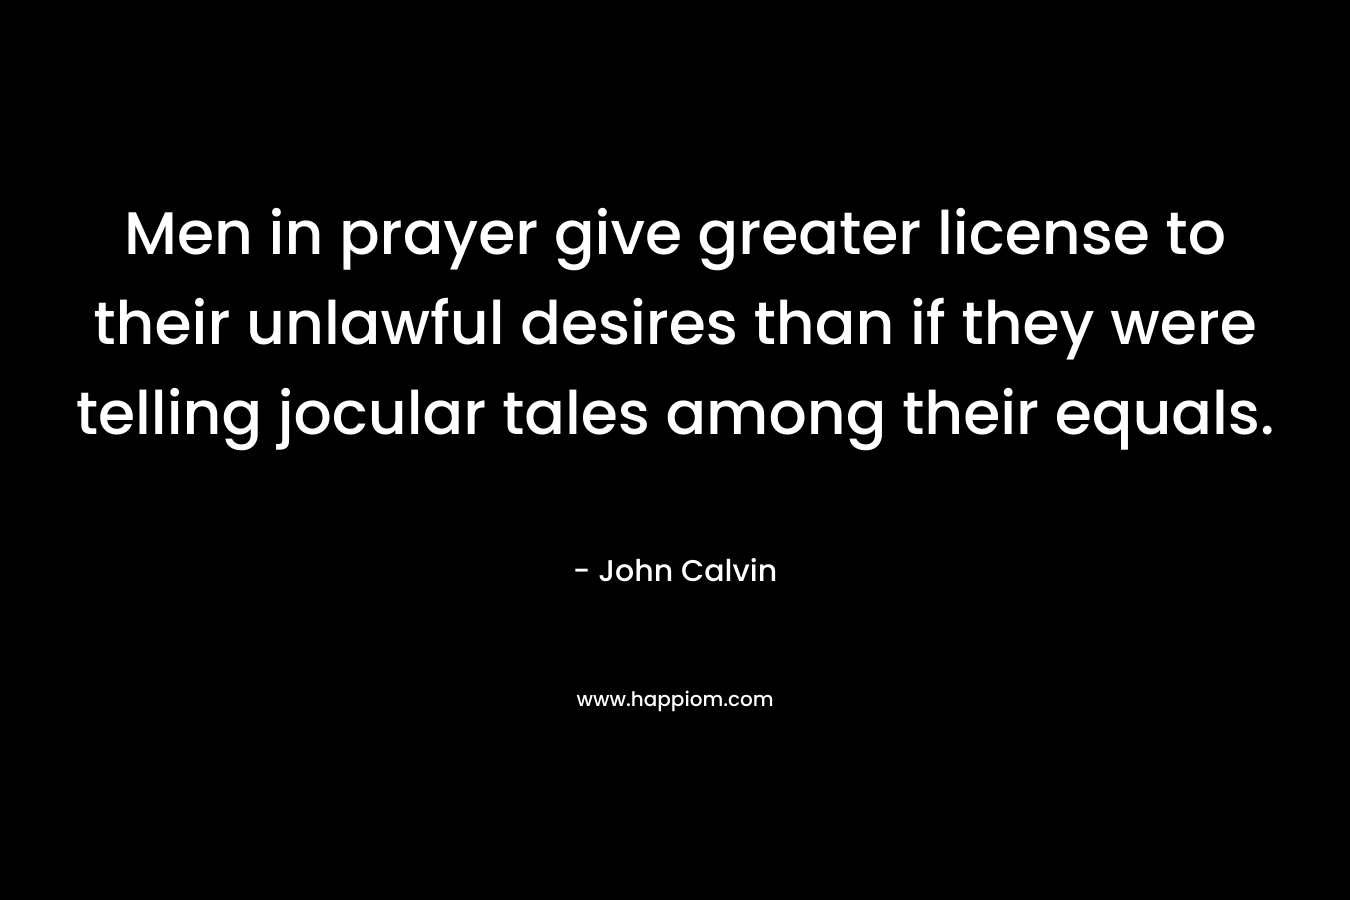 Men in prayer give greater license to their unlawful desires than if they were telling jocular tales among their equals. – John Calvin